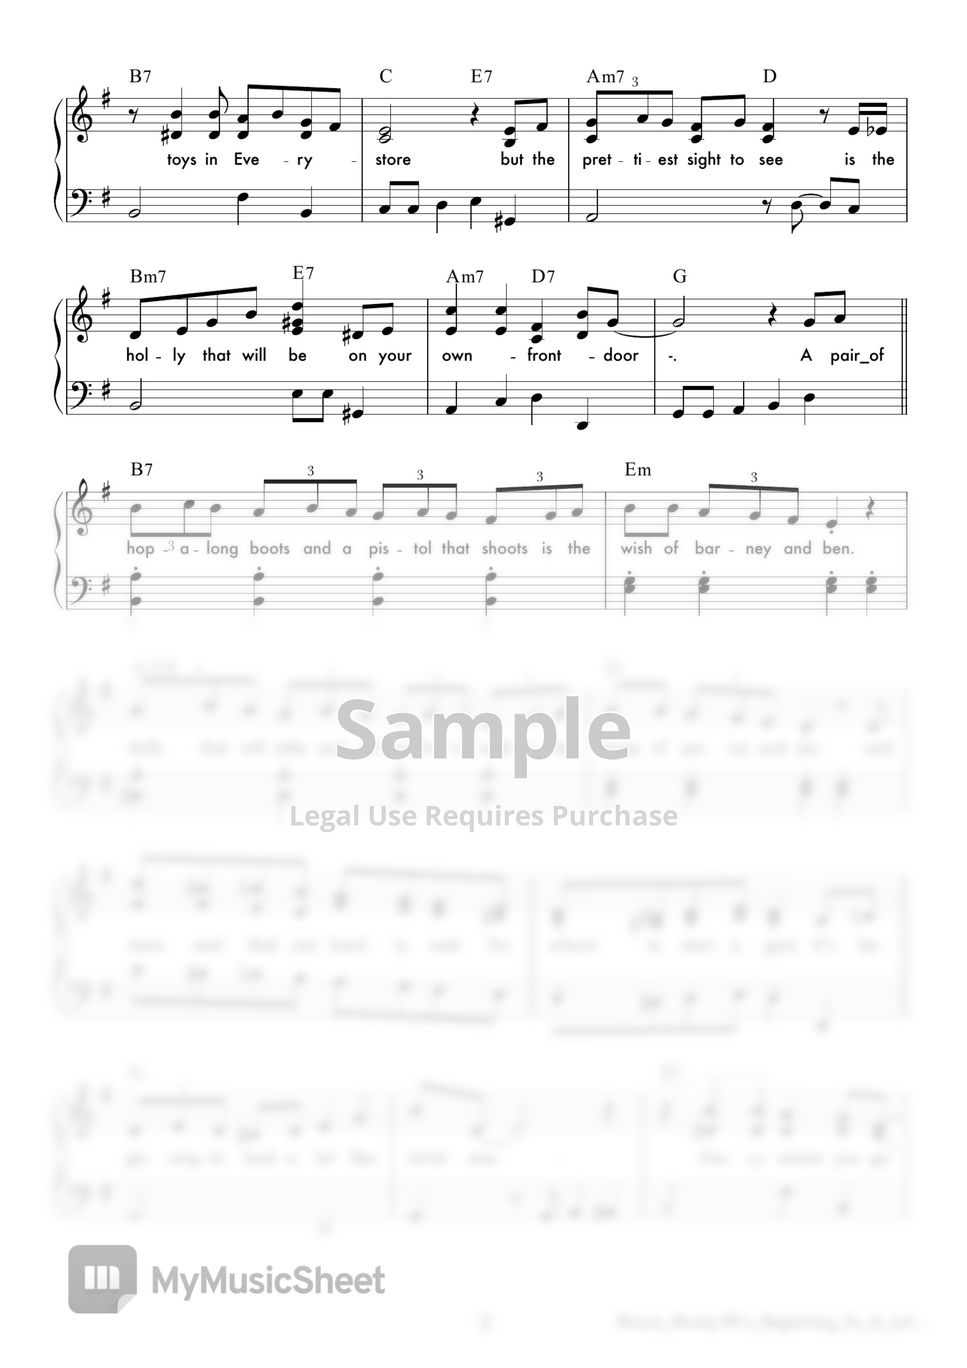 Michael Buble - It's Beginning To Look A Lot Like Christmas (Easy piano sheet) by Lava